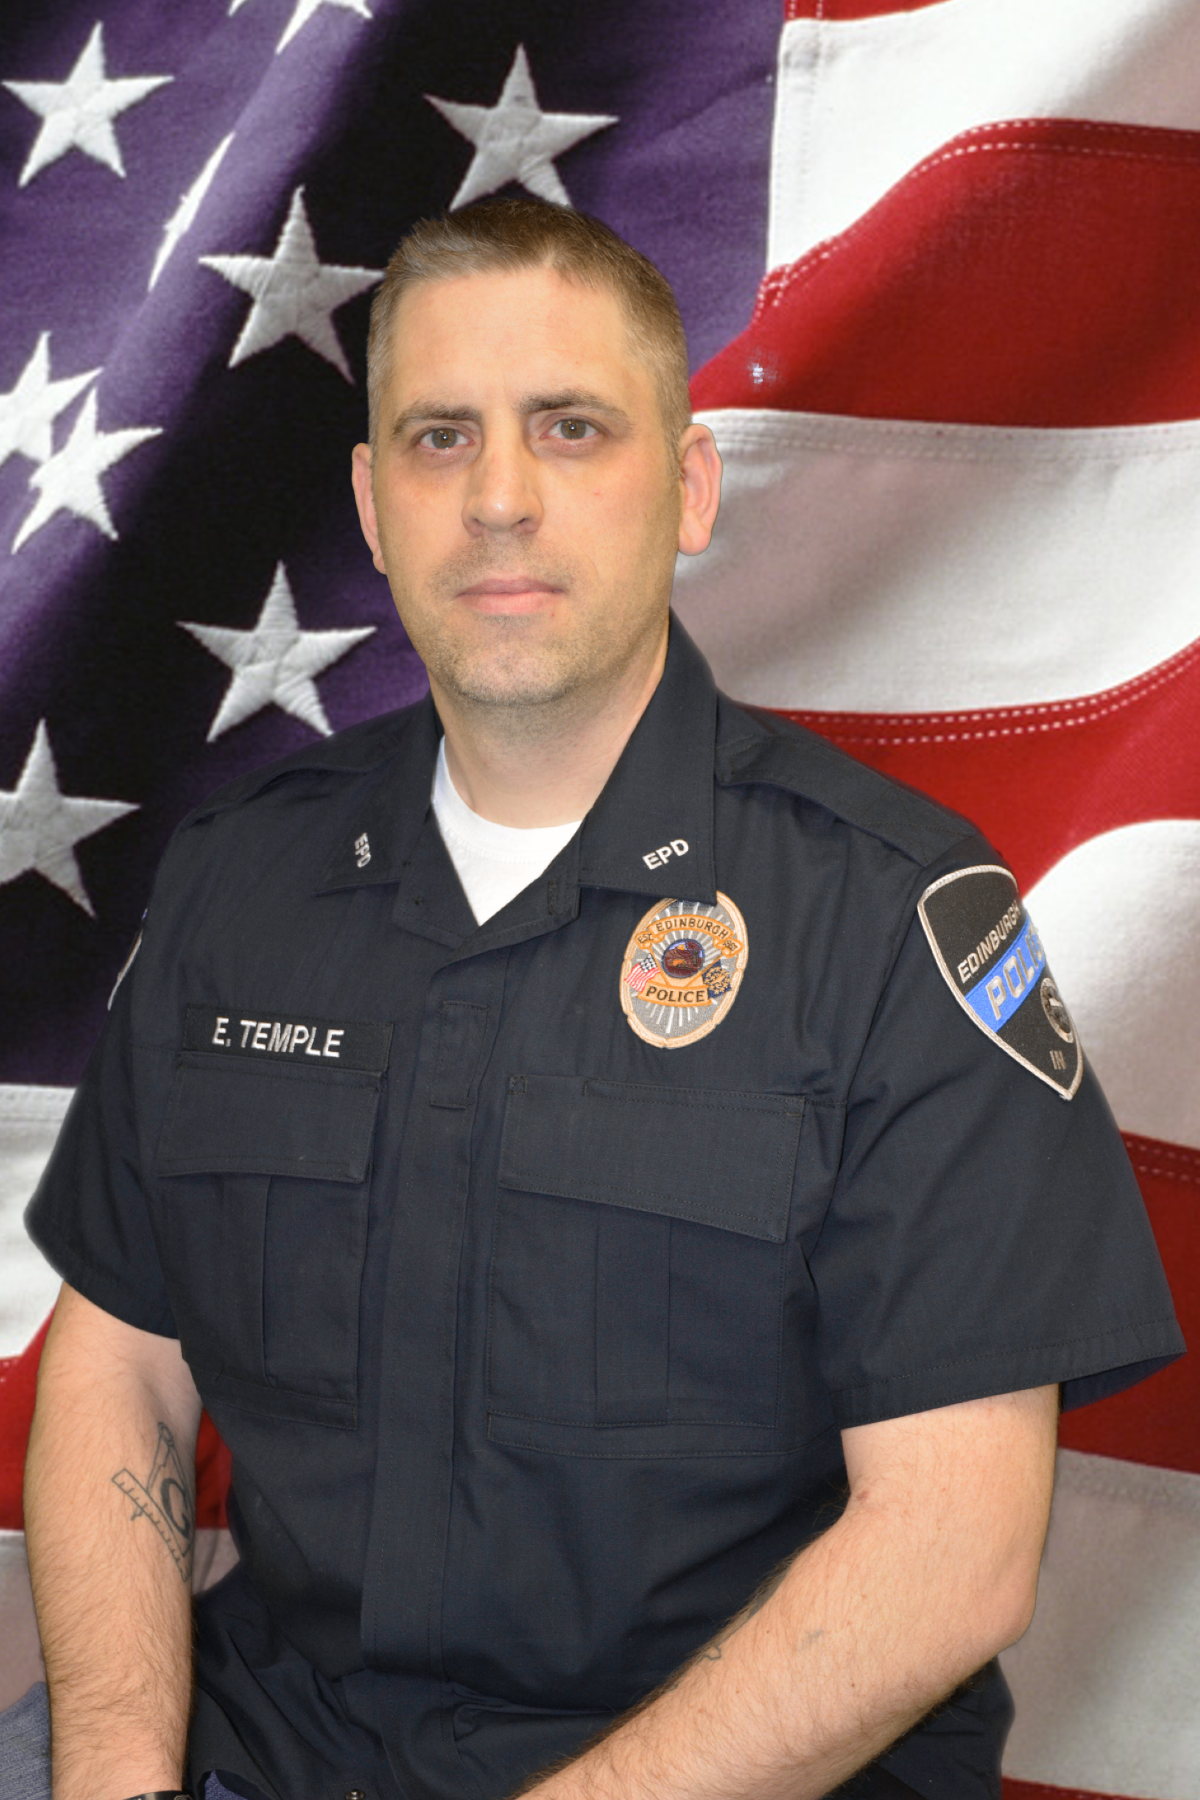 Officer Eric Temple